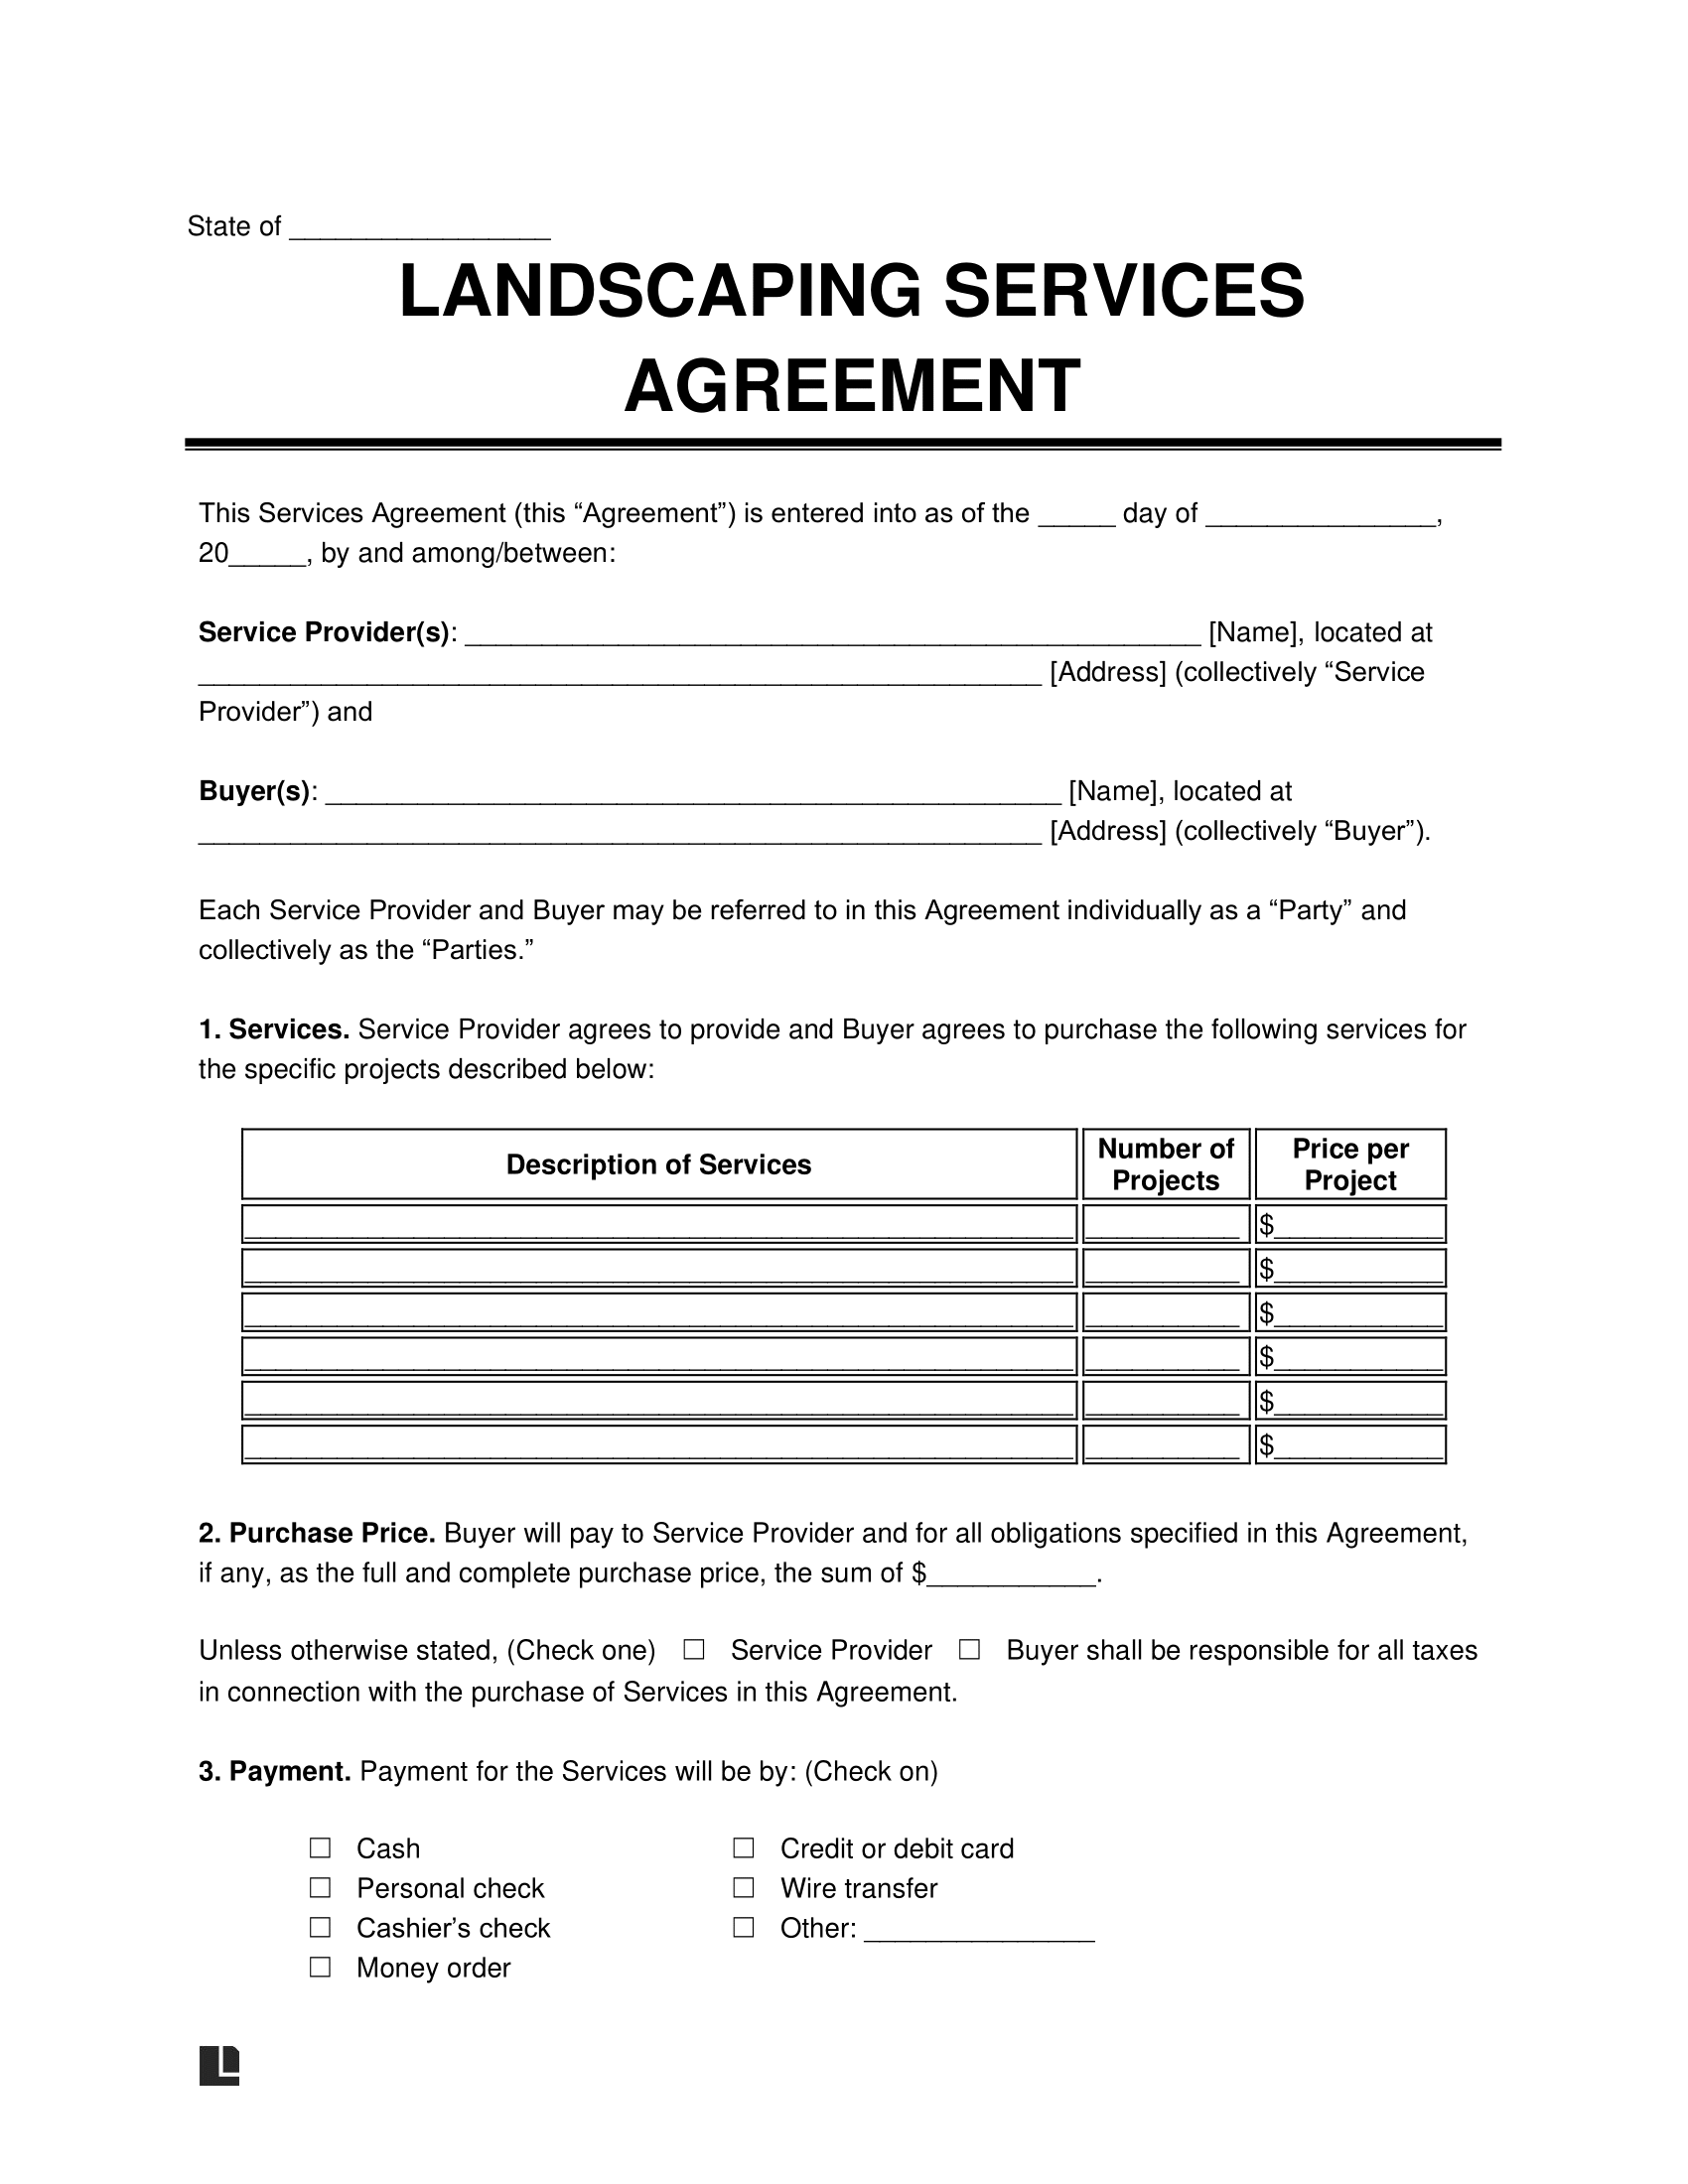 Contract Land Clearing: Professional Partnerships